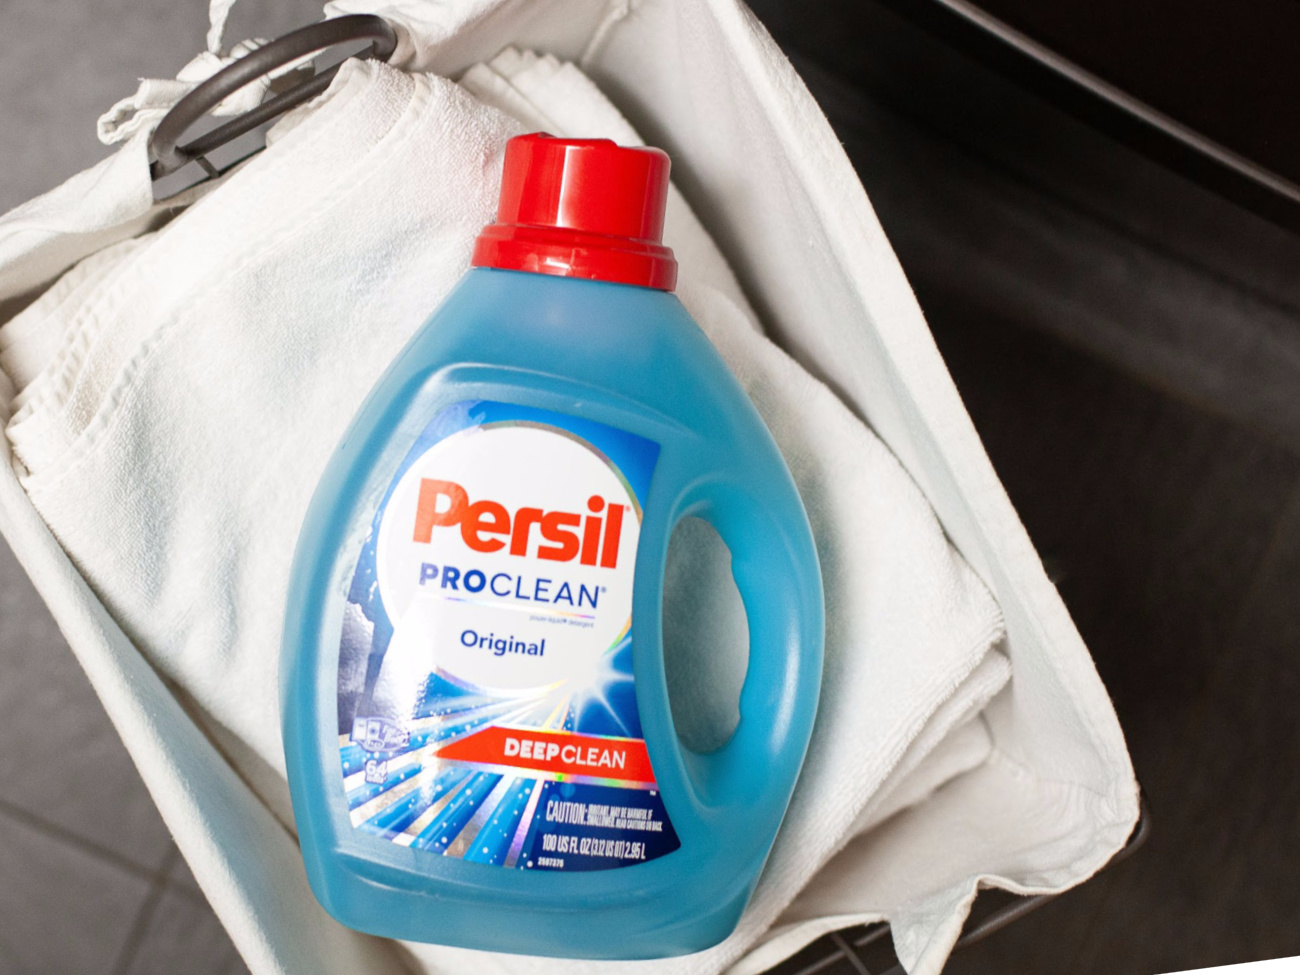 Get Persil Detergent As Low As $7.49 At Publix – Ends 7/24